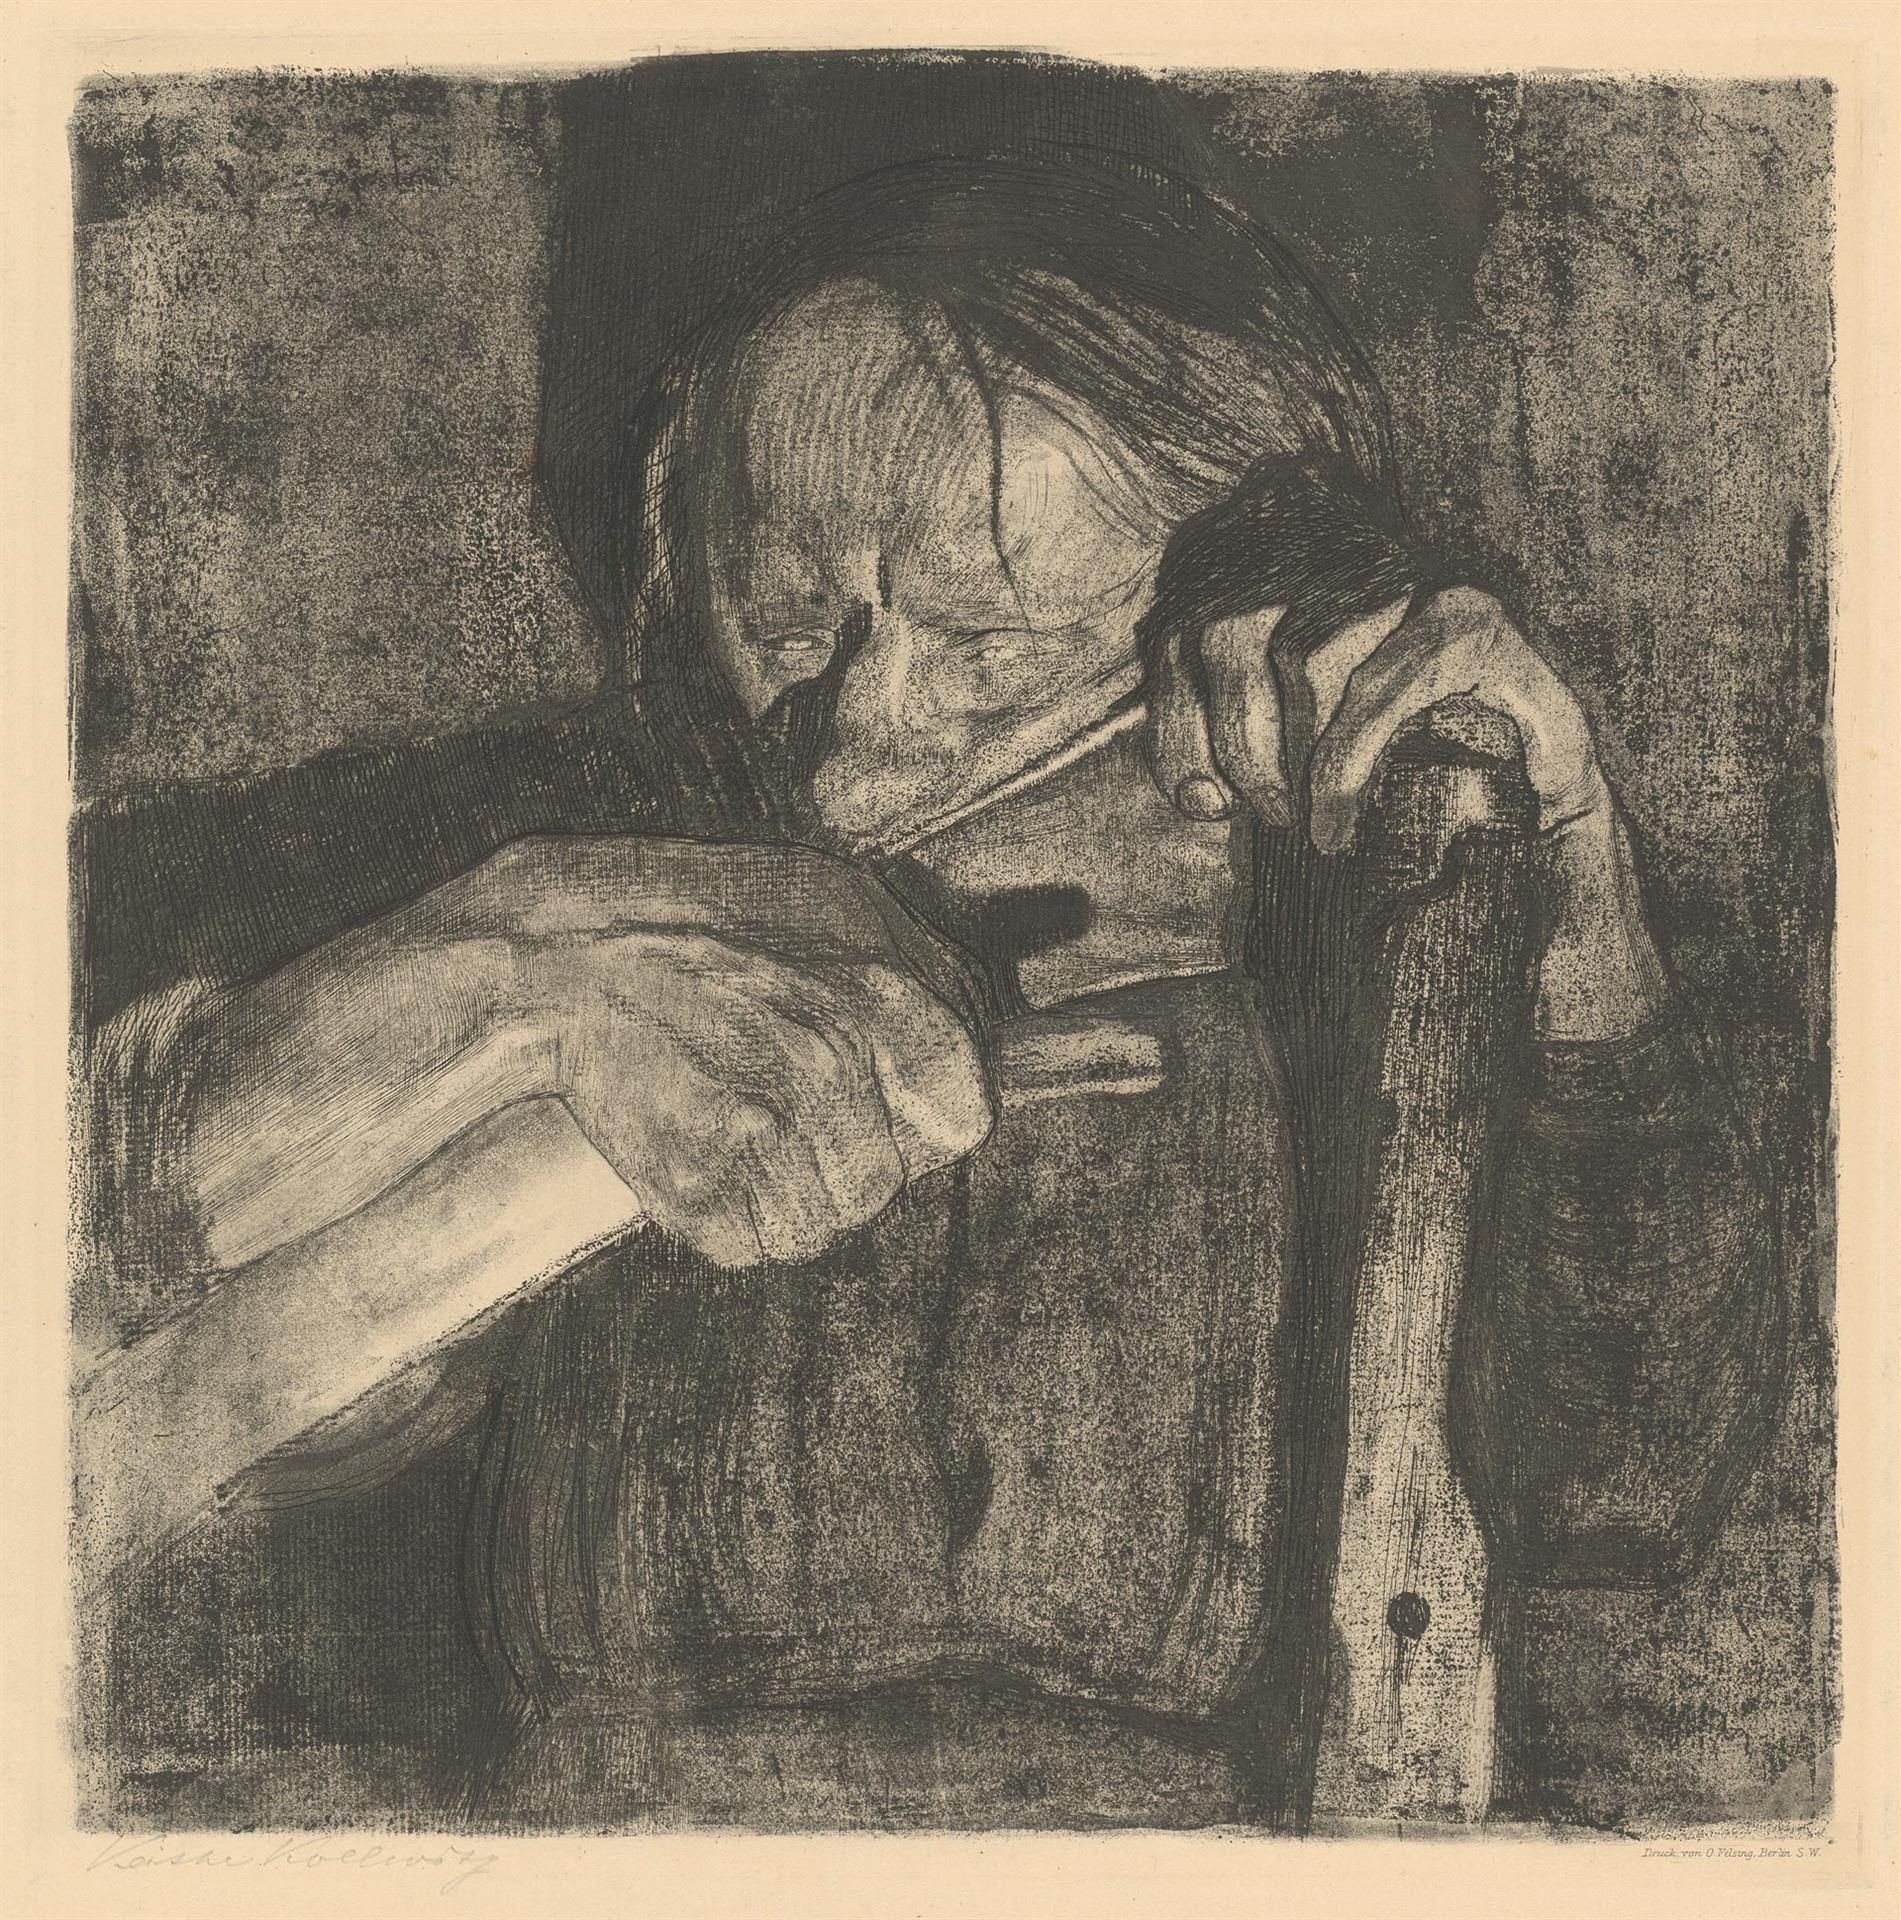 Käthe Kollwitz, Sharpening the Scythe, sheet 3 of the cycle »Peasants War«, 1908, line etching, drypoint, sandpaper, aquatint and soft ground with imprint of laid paper and Ziegler's transfer paper, Kn 88 X b